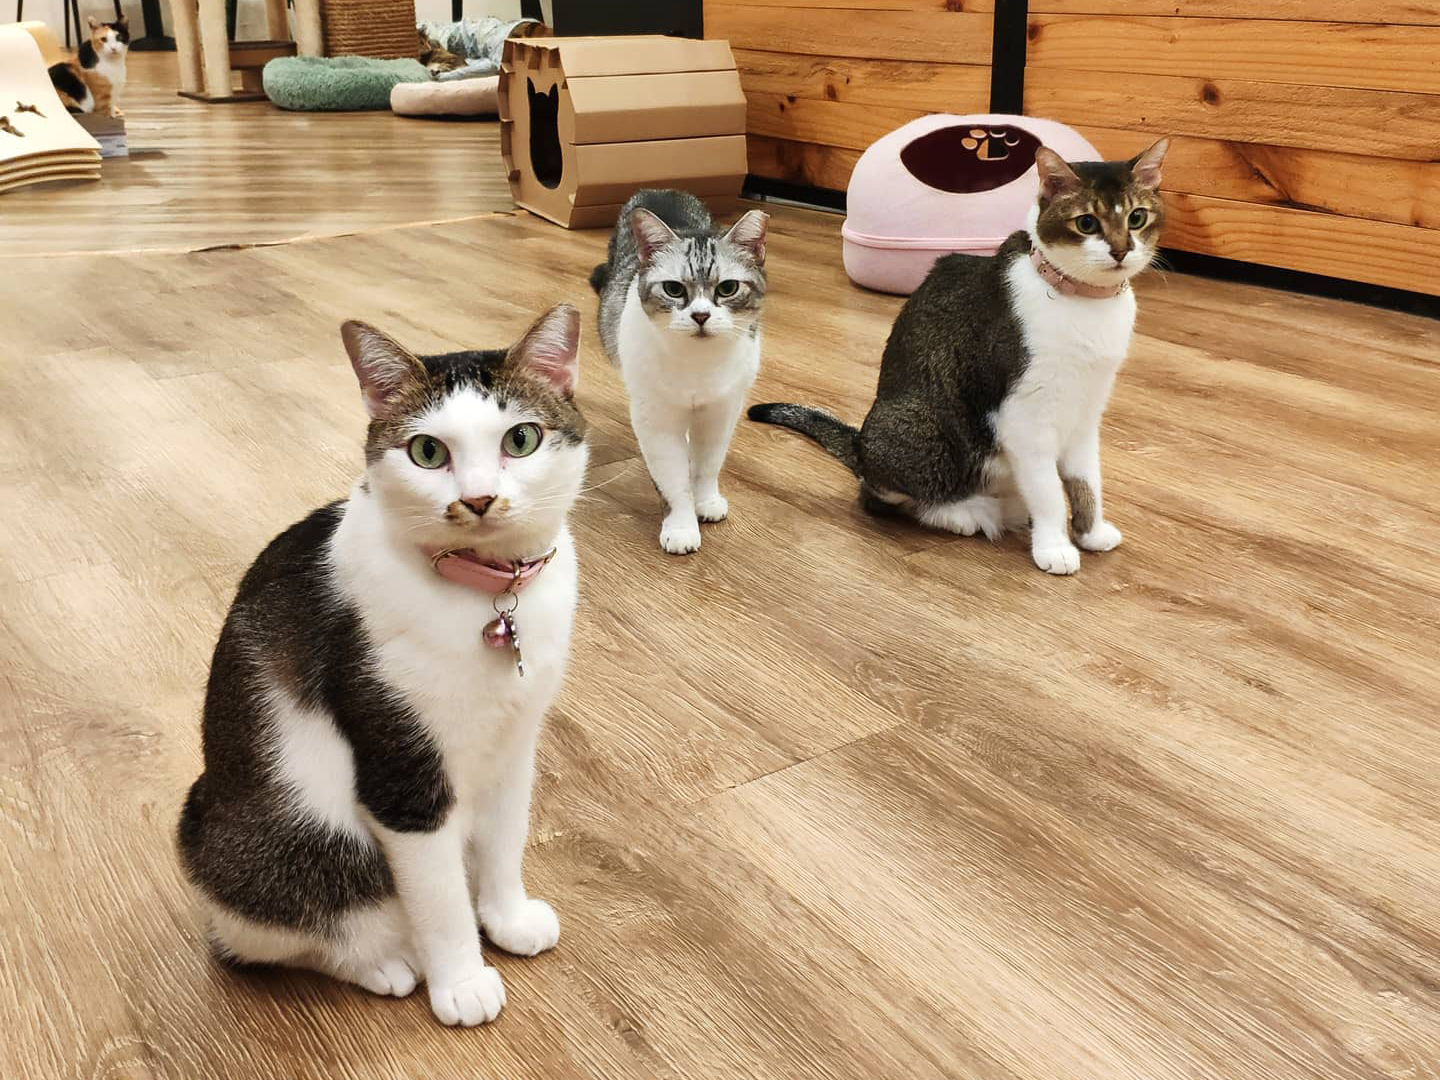 Enjoy the company of Furry Felines at The Cat Cafe